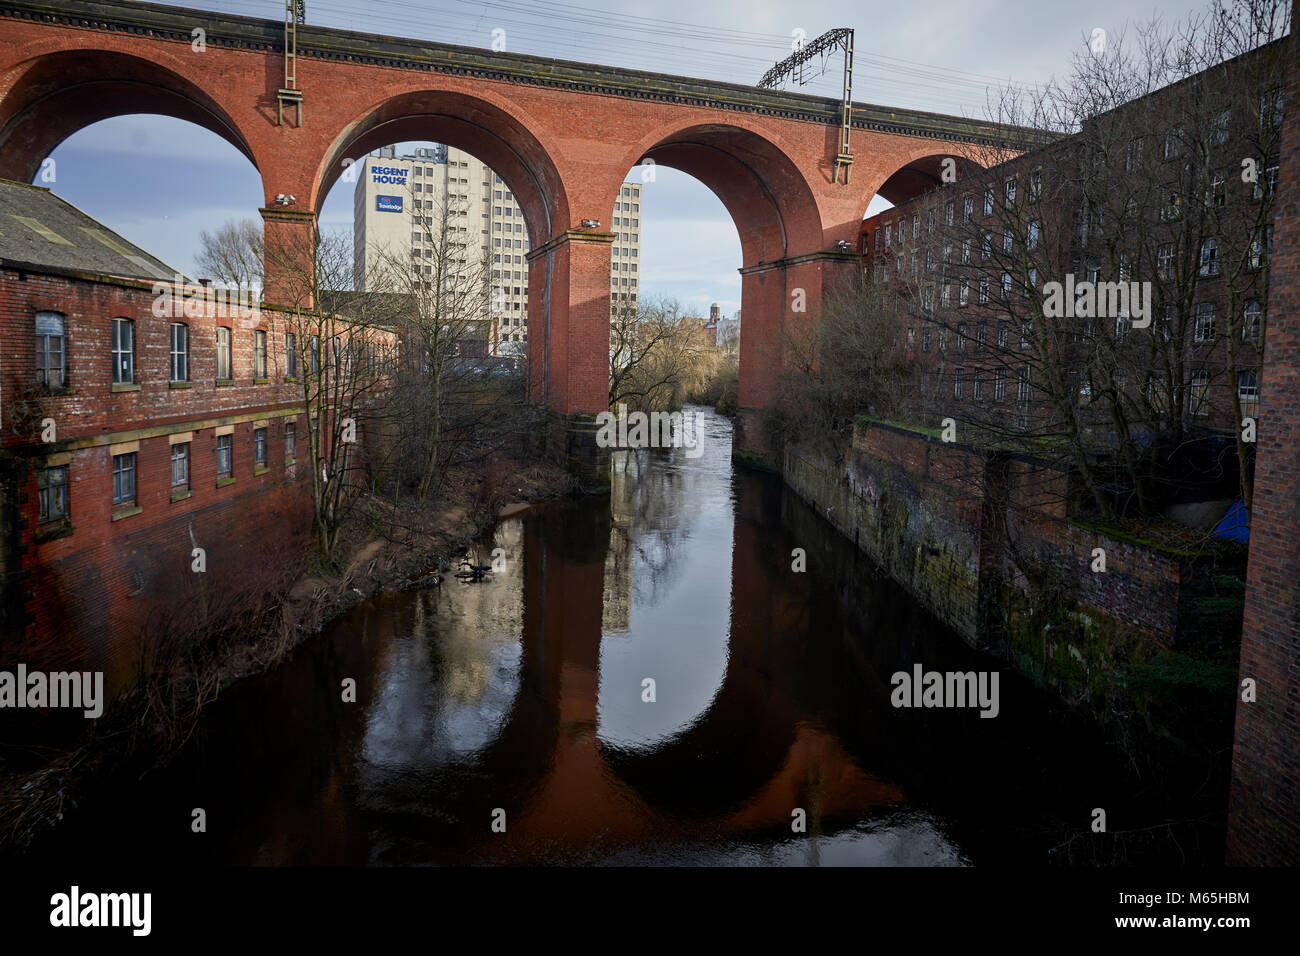 Stockport Viaduct reflecting into the River Mersey, in Stockport Stock Photo